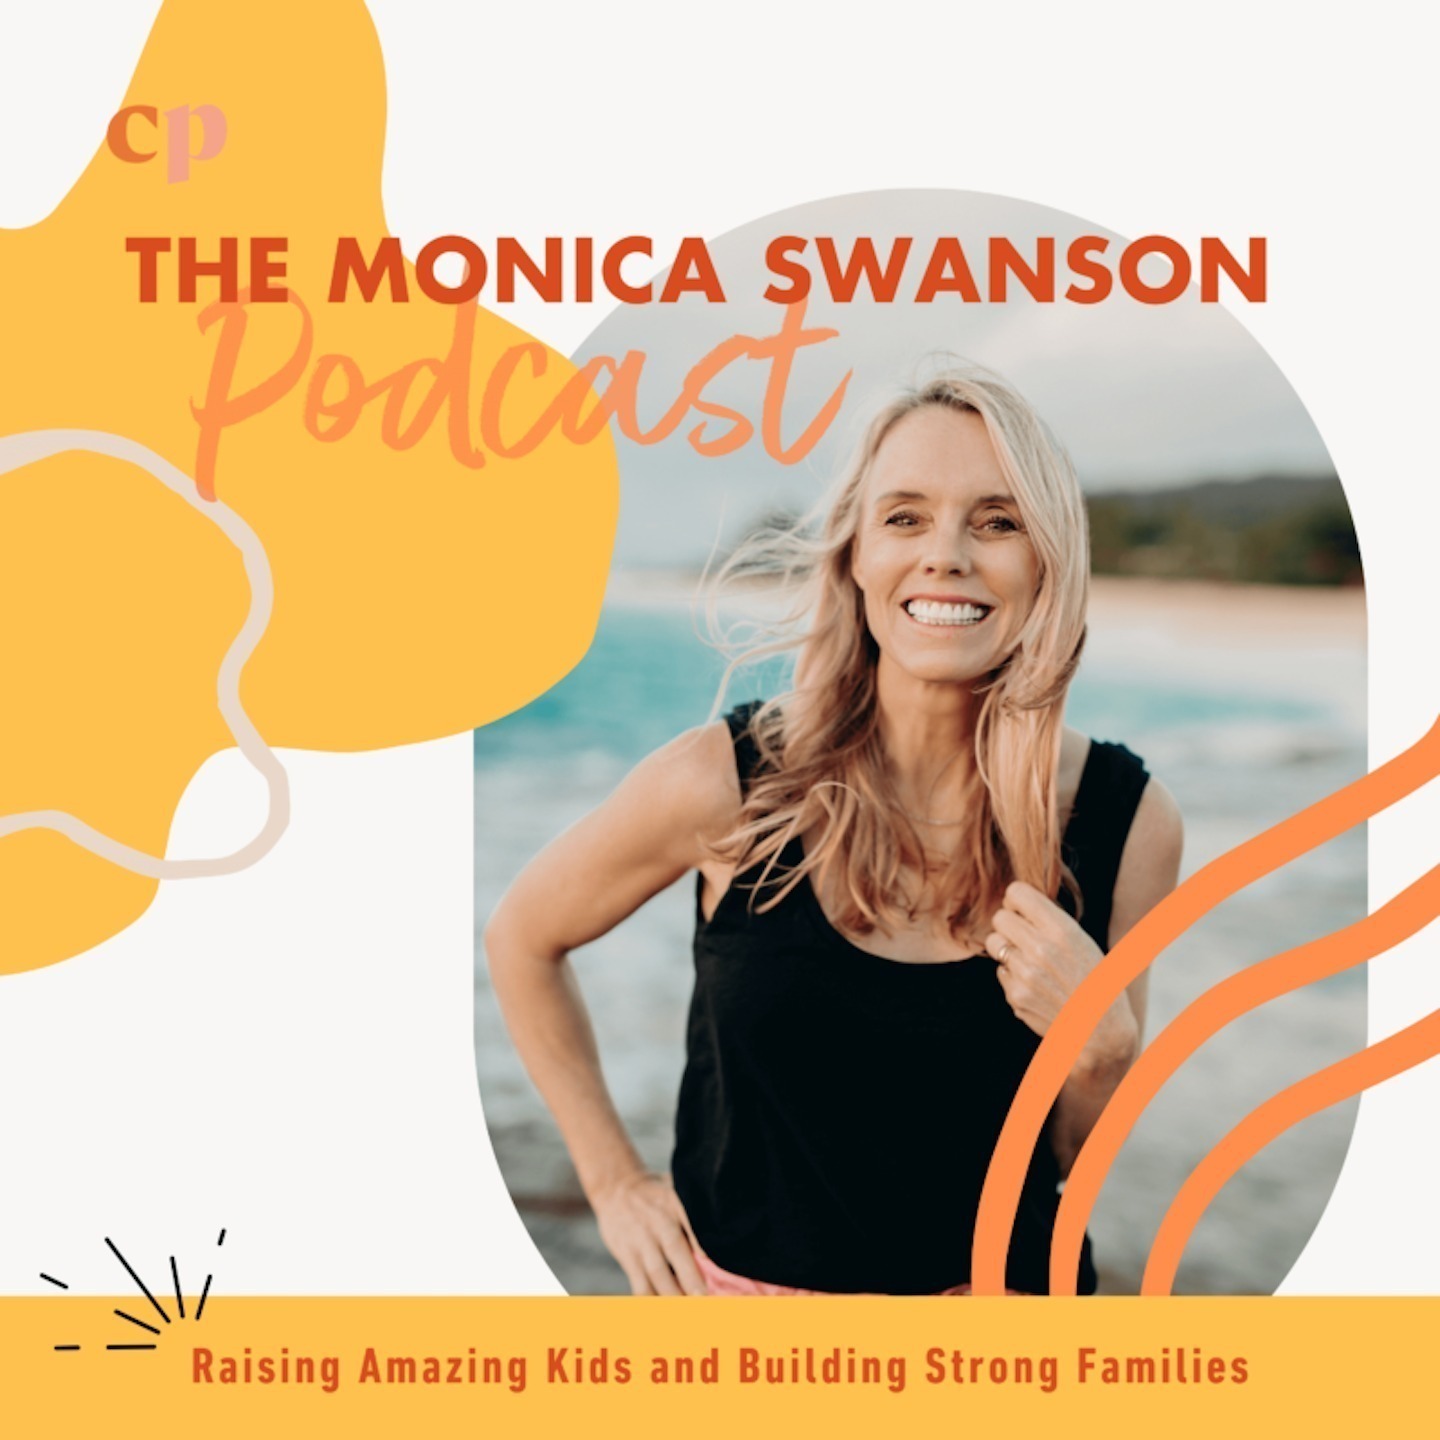 No Regrets Parenting in Difficult Cultural Times, with Rhonda Stoppe